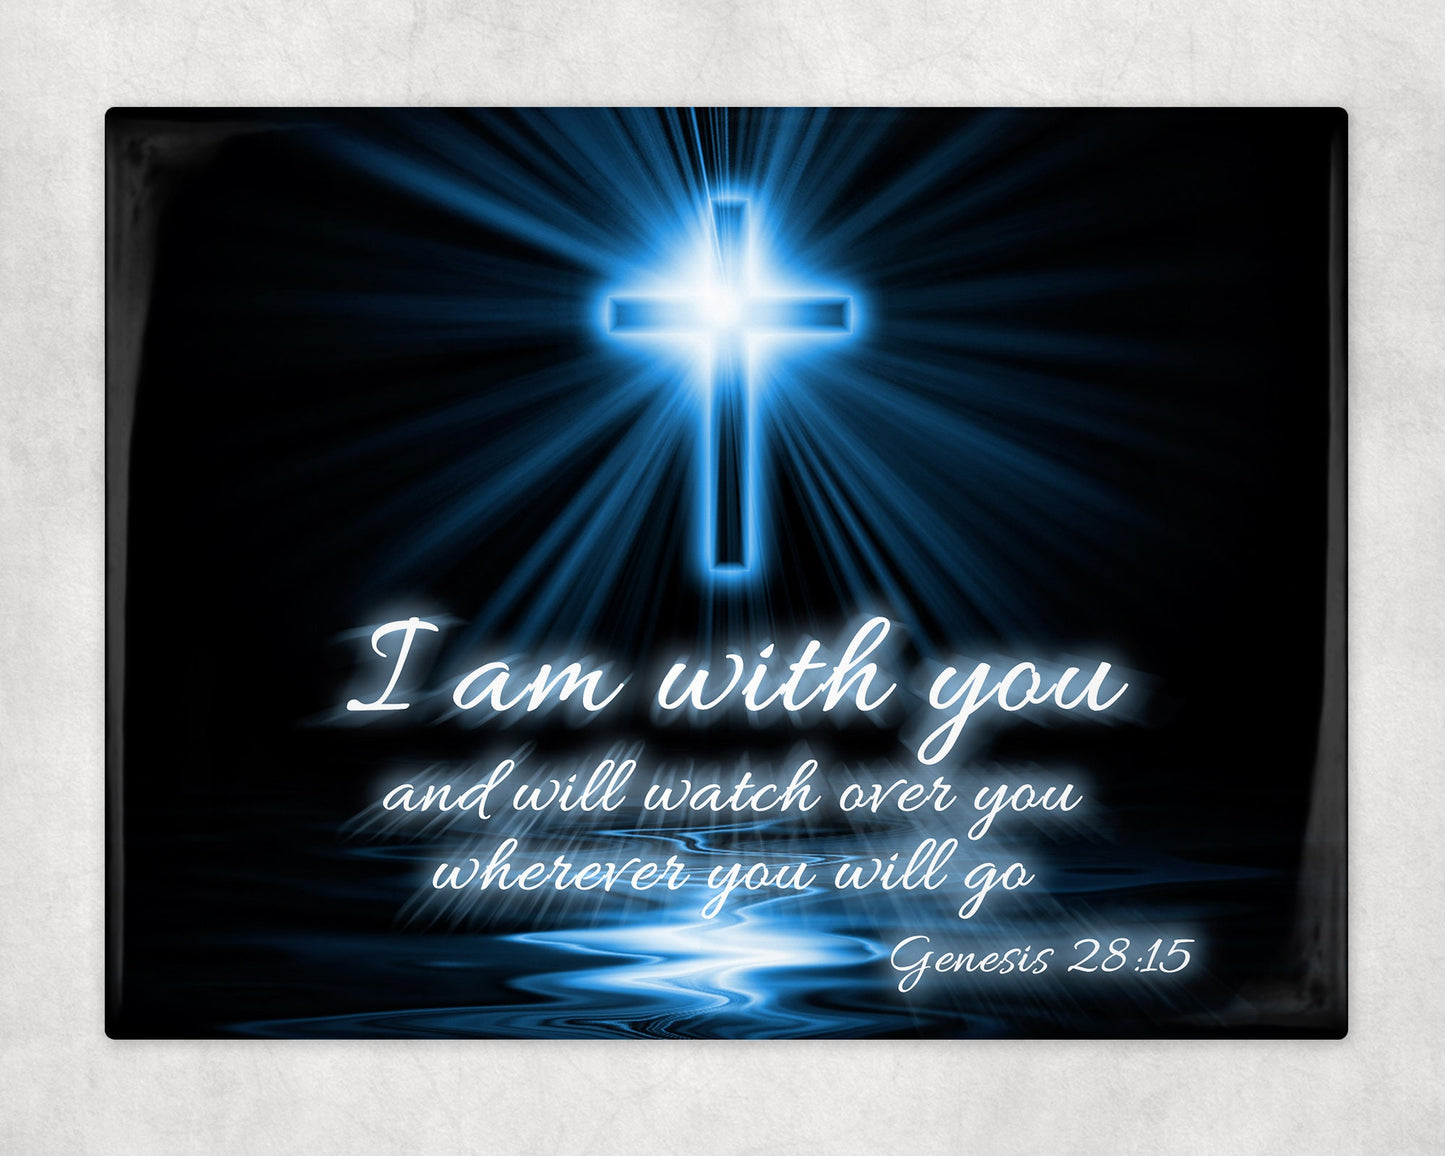 I Am With You Christian Cross Decorative Ceramic Tile with Optional Easel Back - 6x8 inches